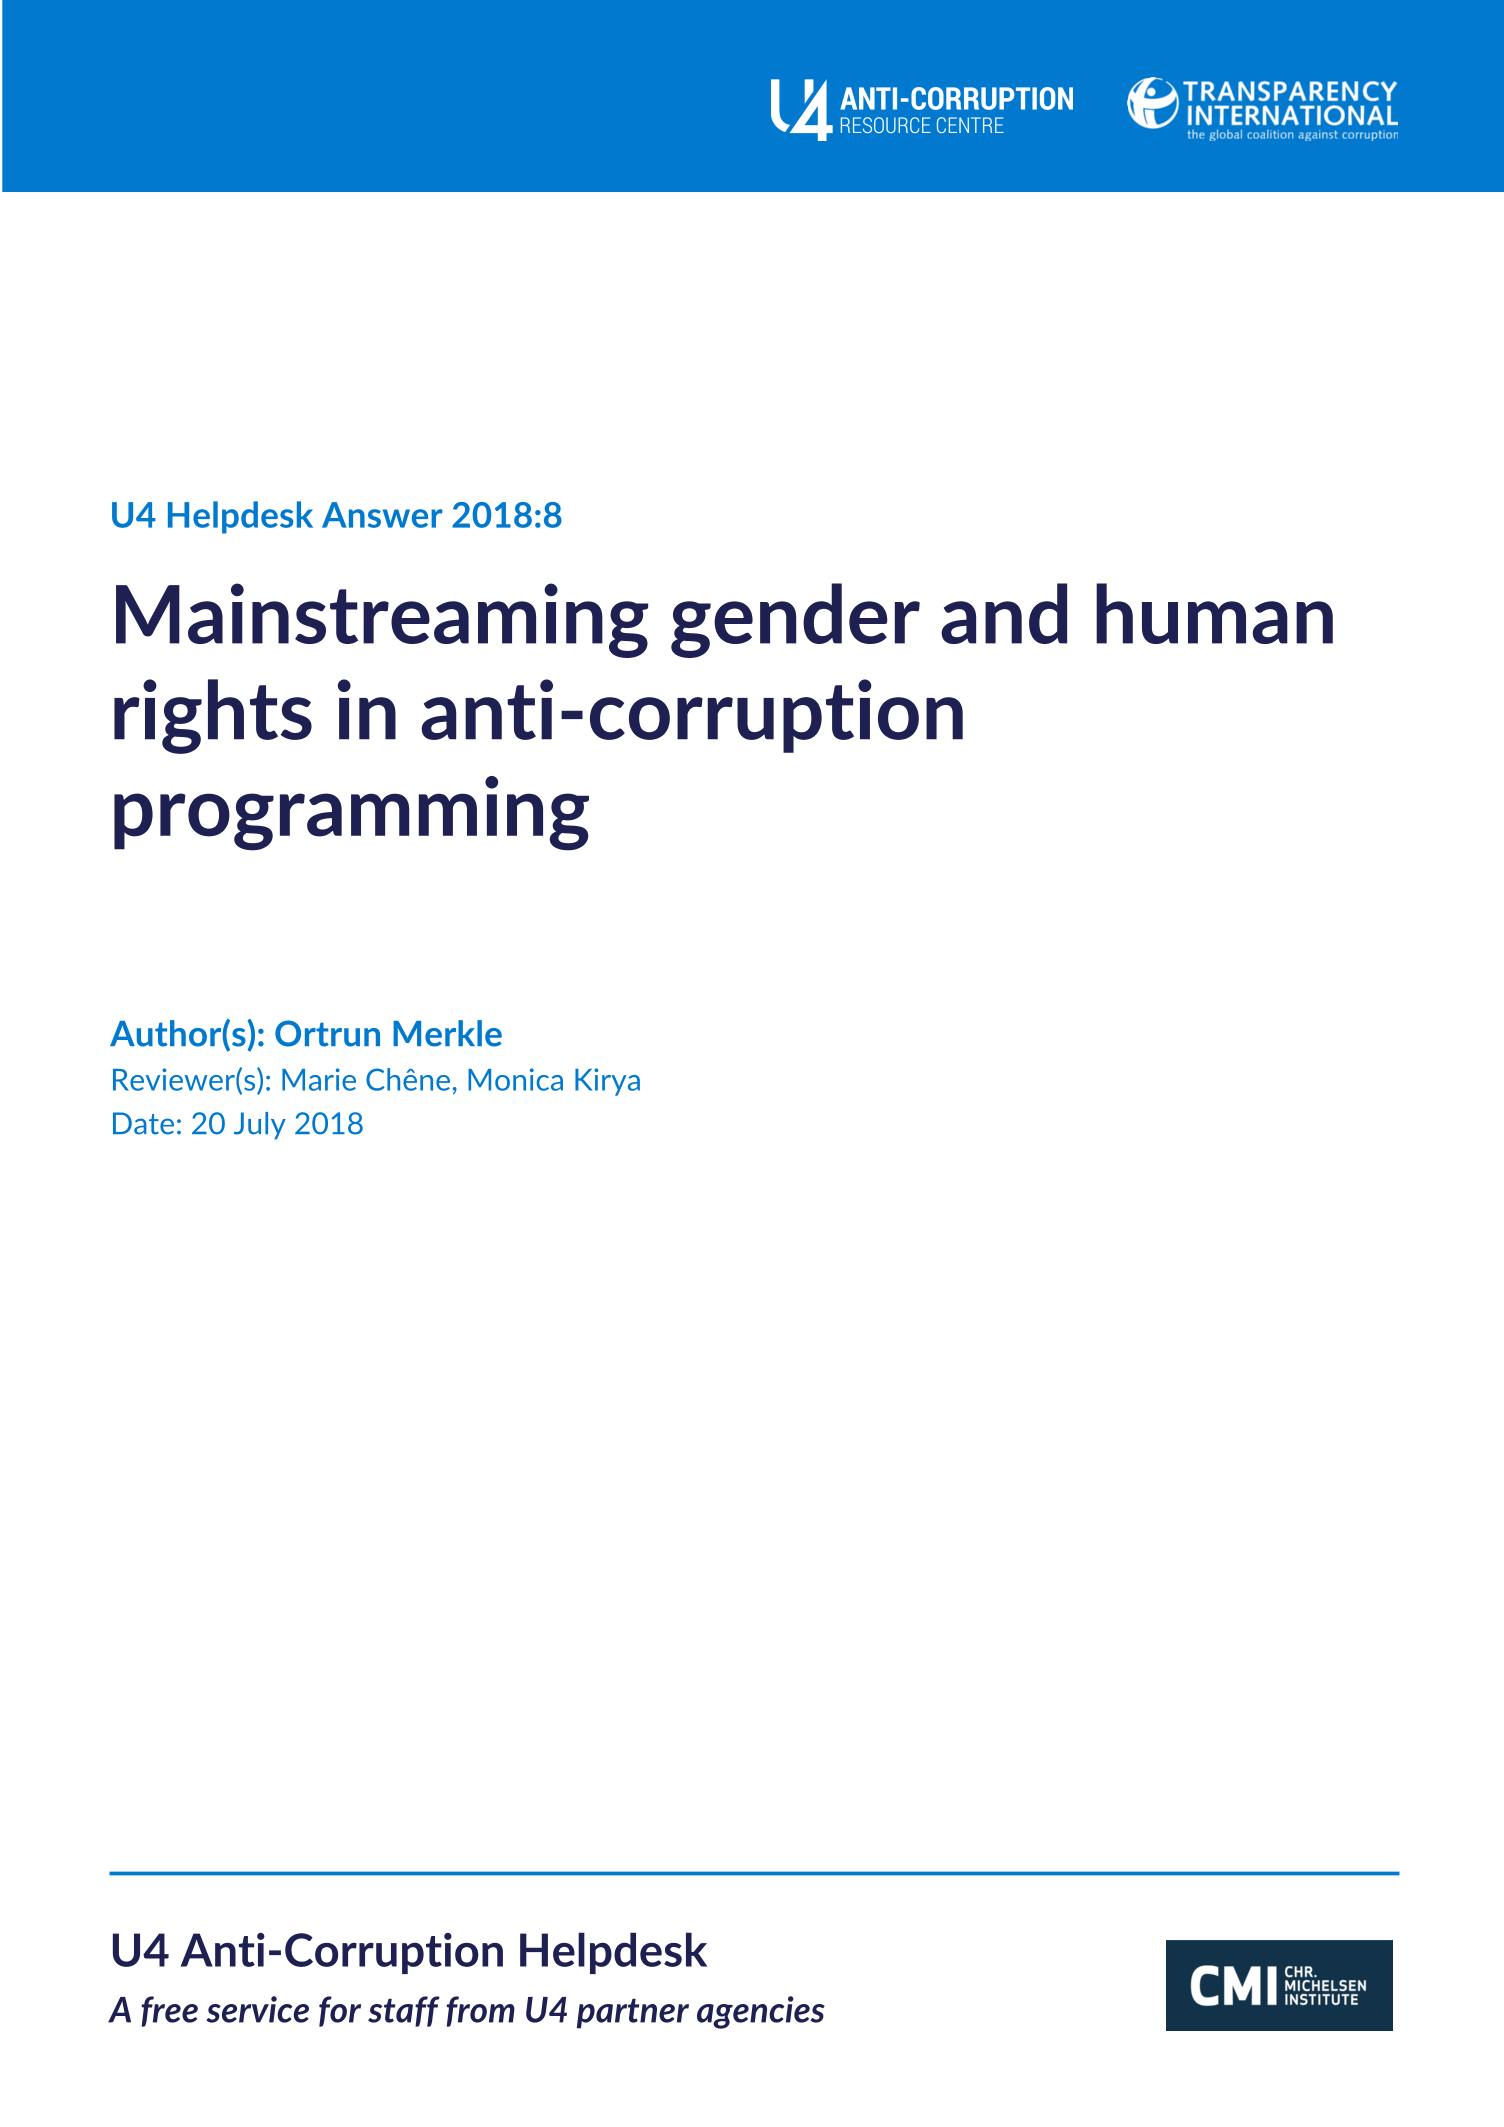 Mainstreaming gender and human rights in anti-corruption programming